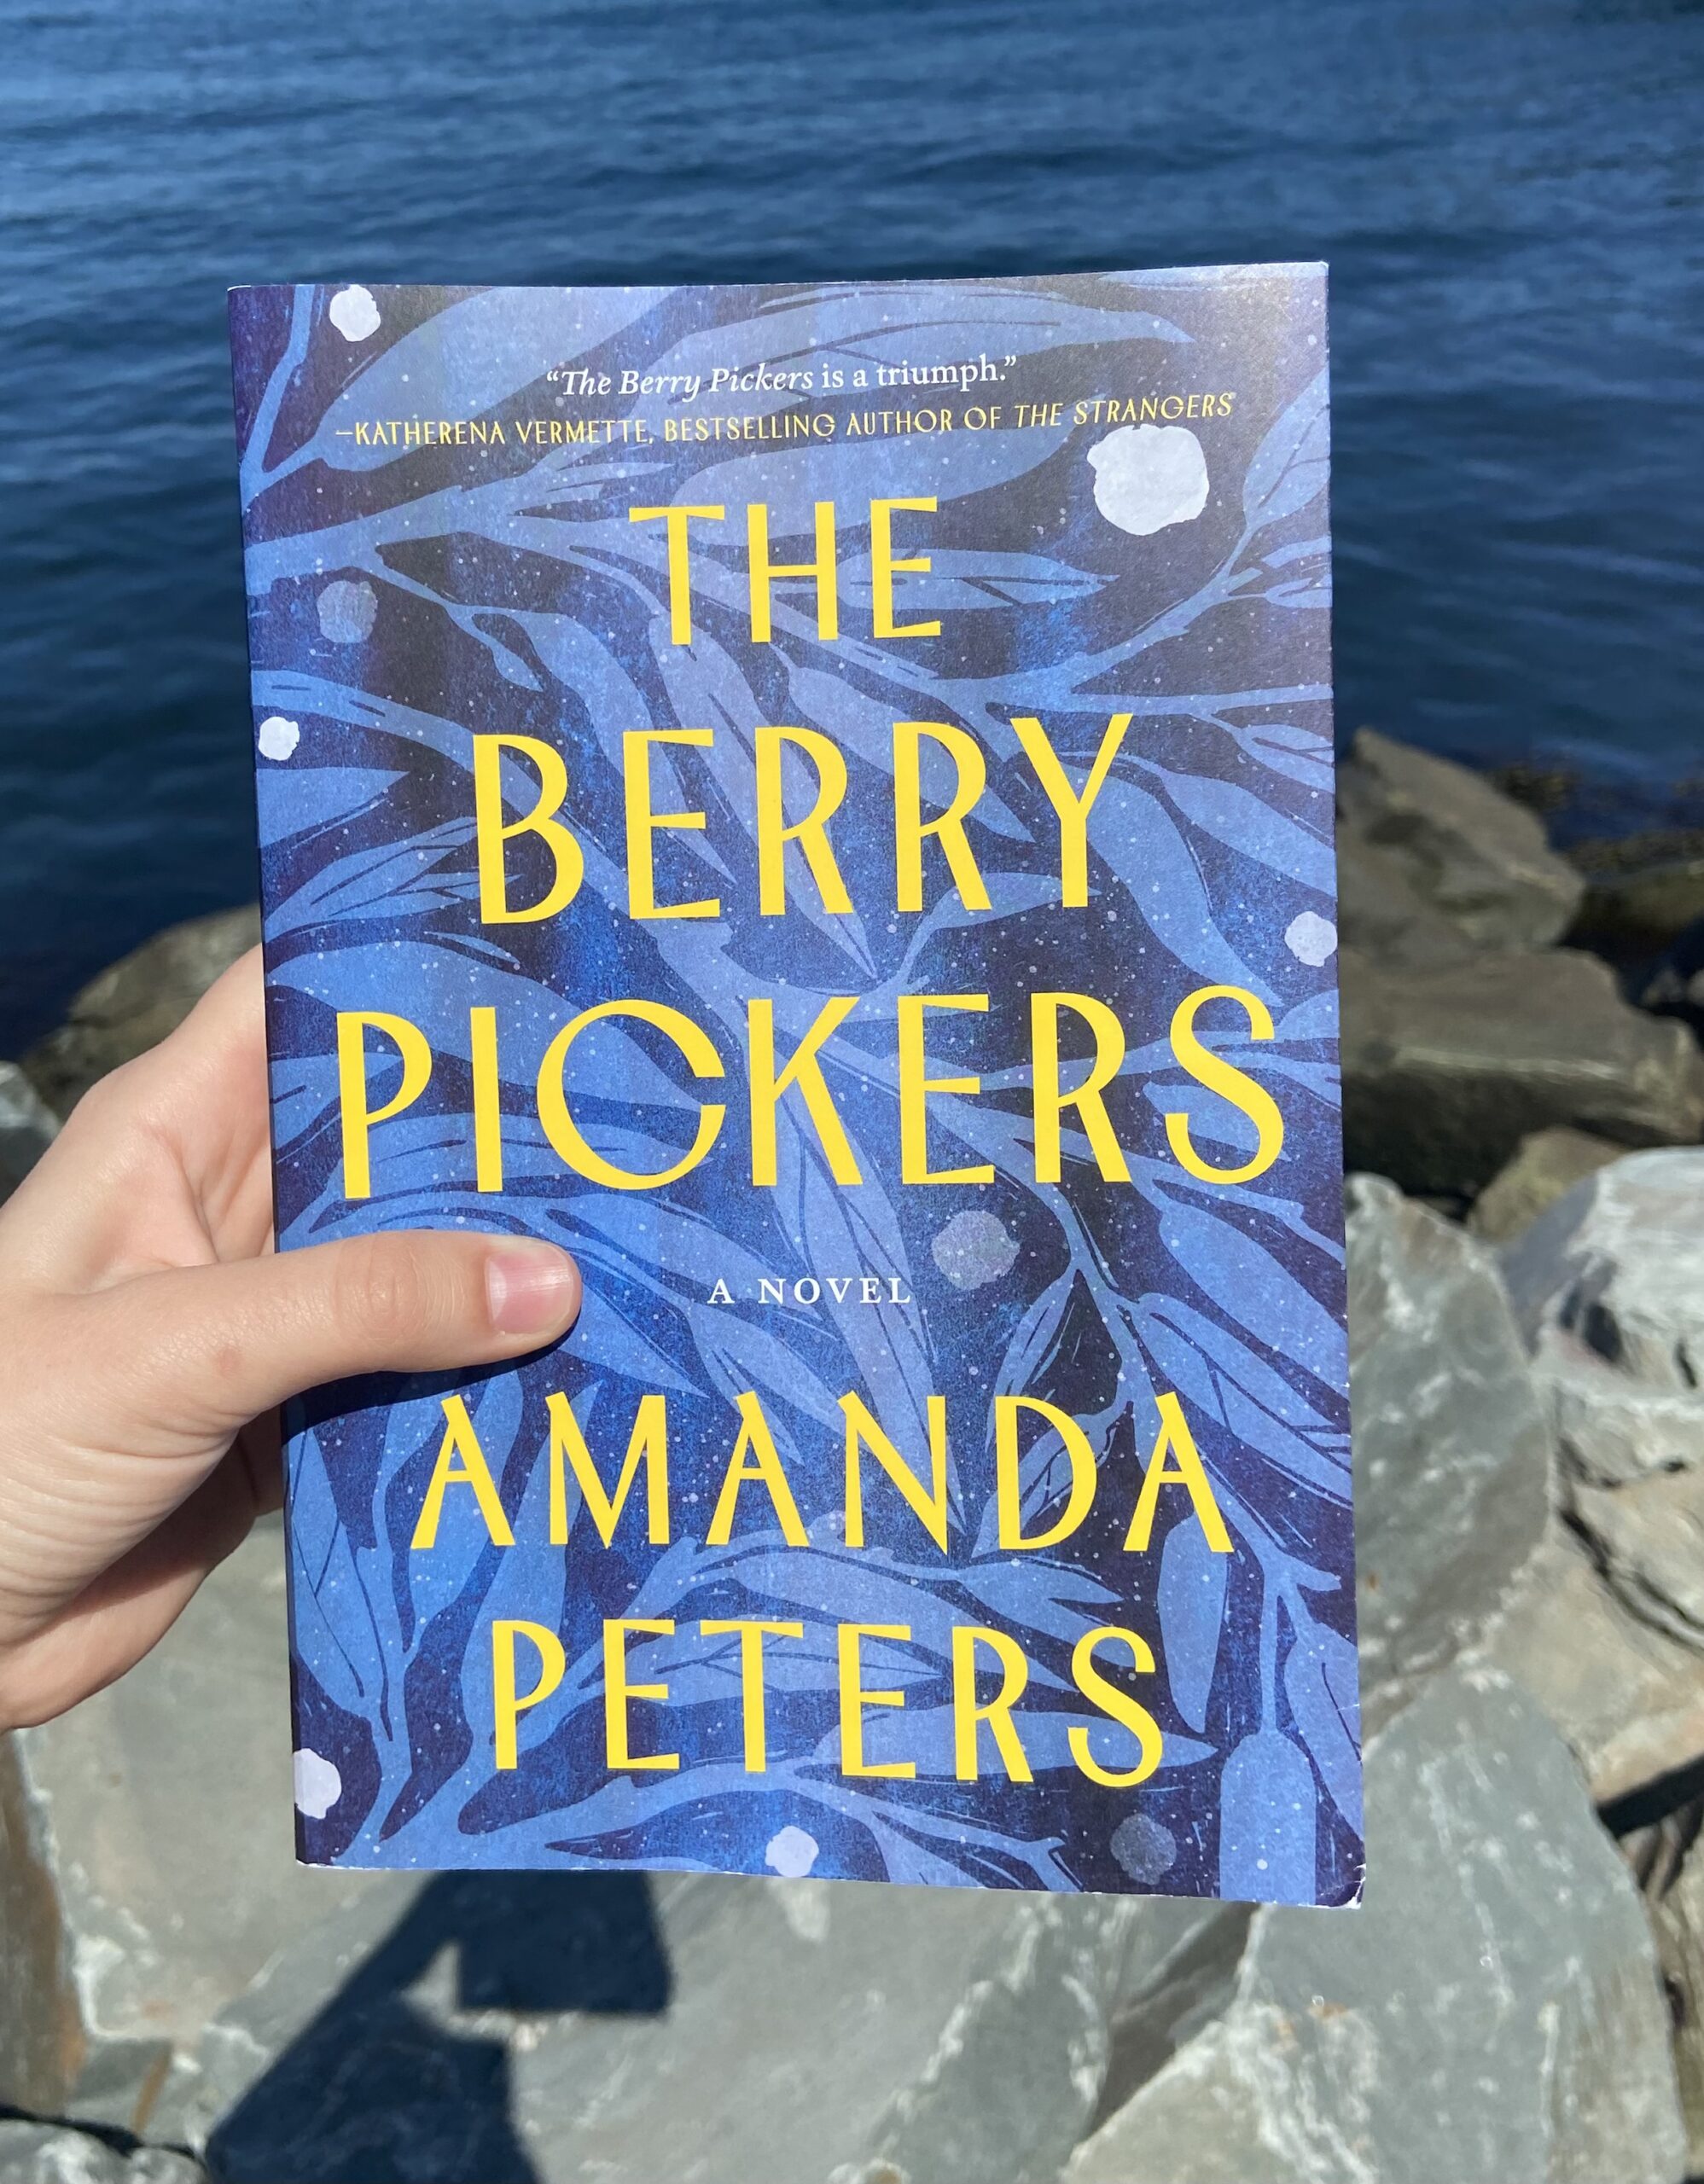 Amanda Peters makes The Berry Pickers ‘easy to fall in love with’